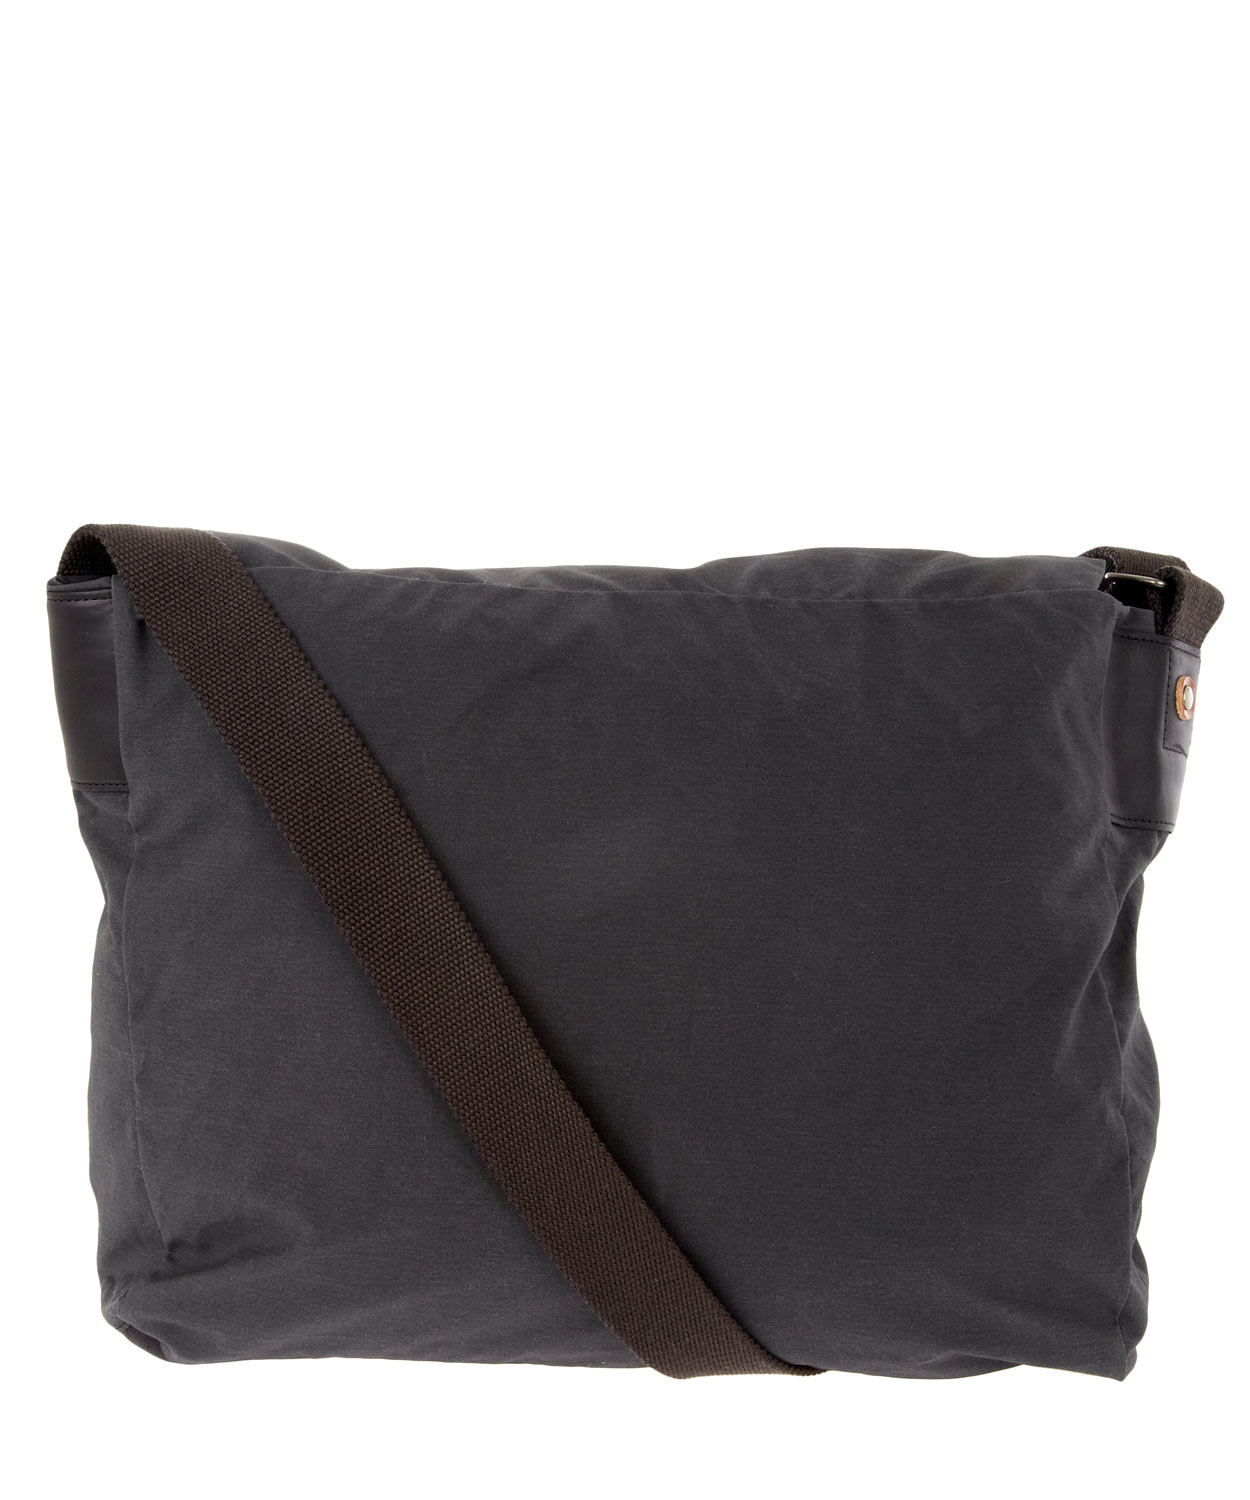 Lyst - Ally Capellino Jeremy Waxed Cotton Messenger Bag in Black for Men